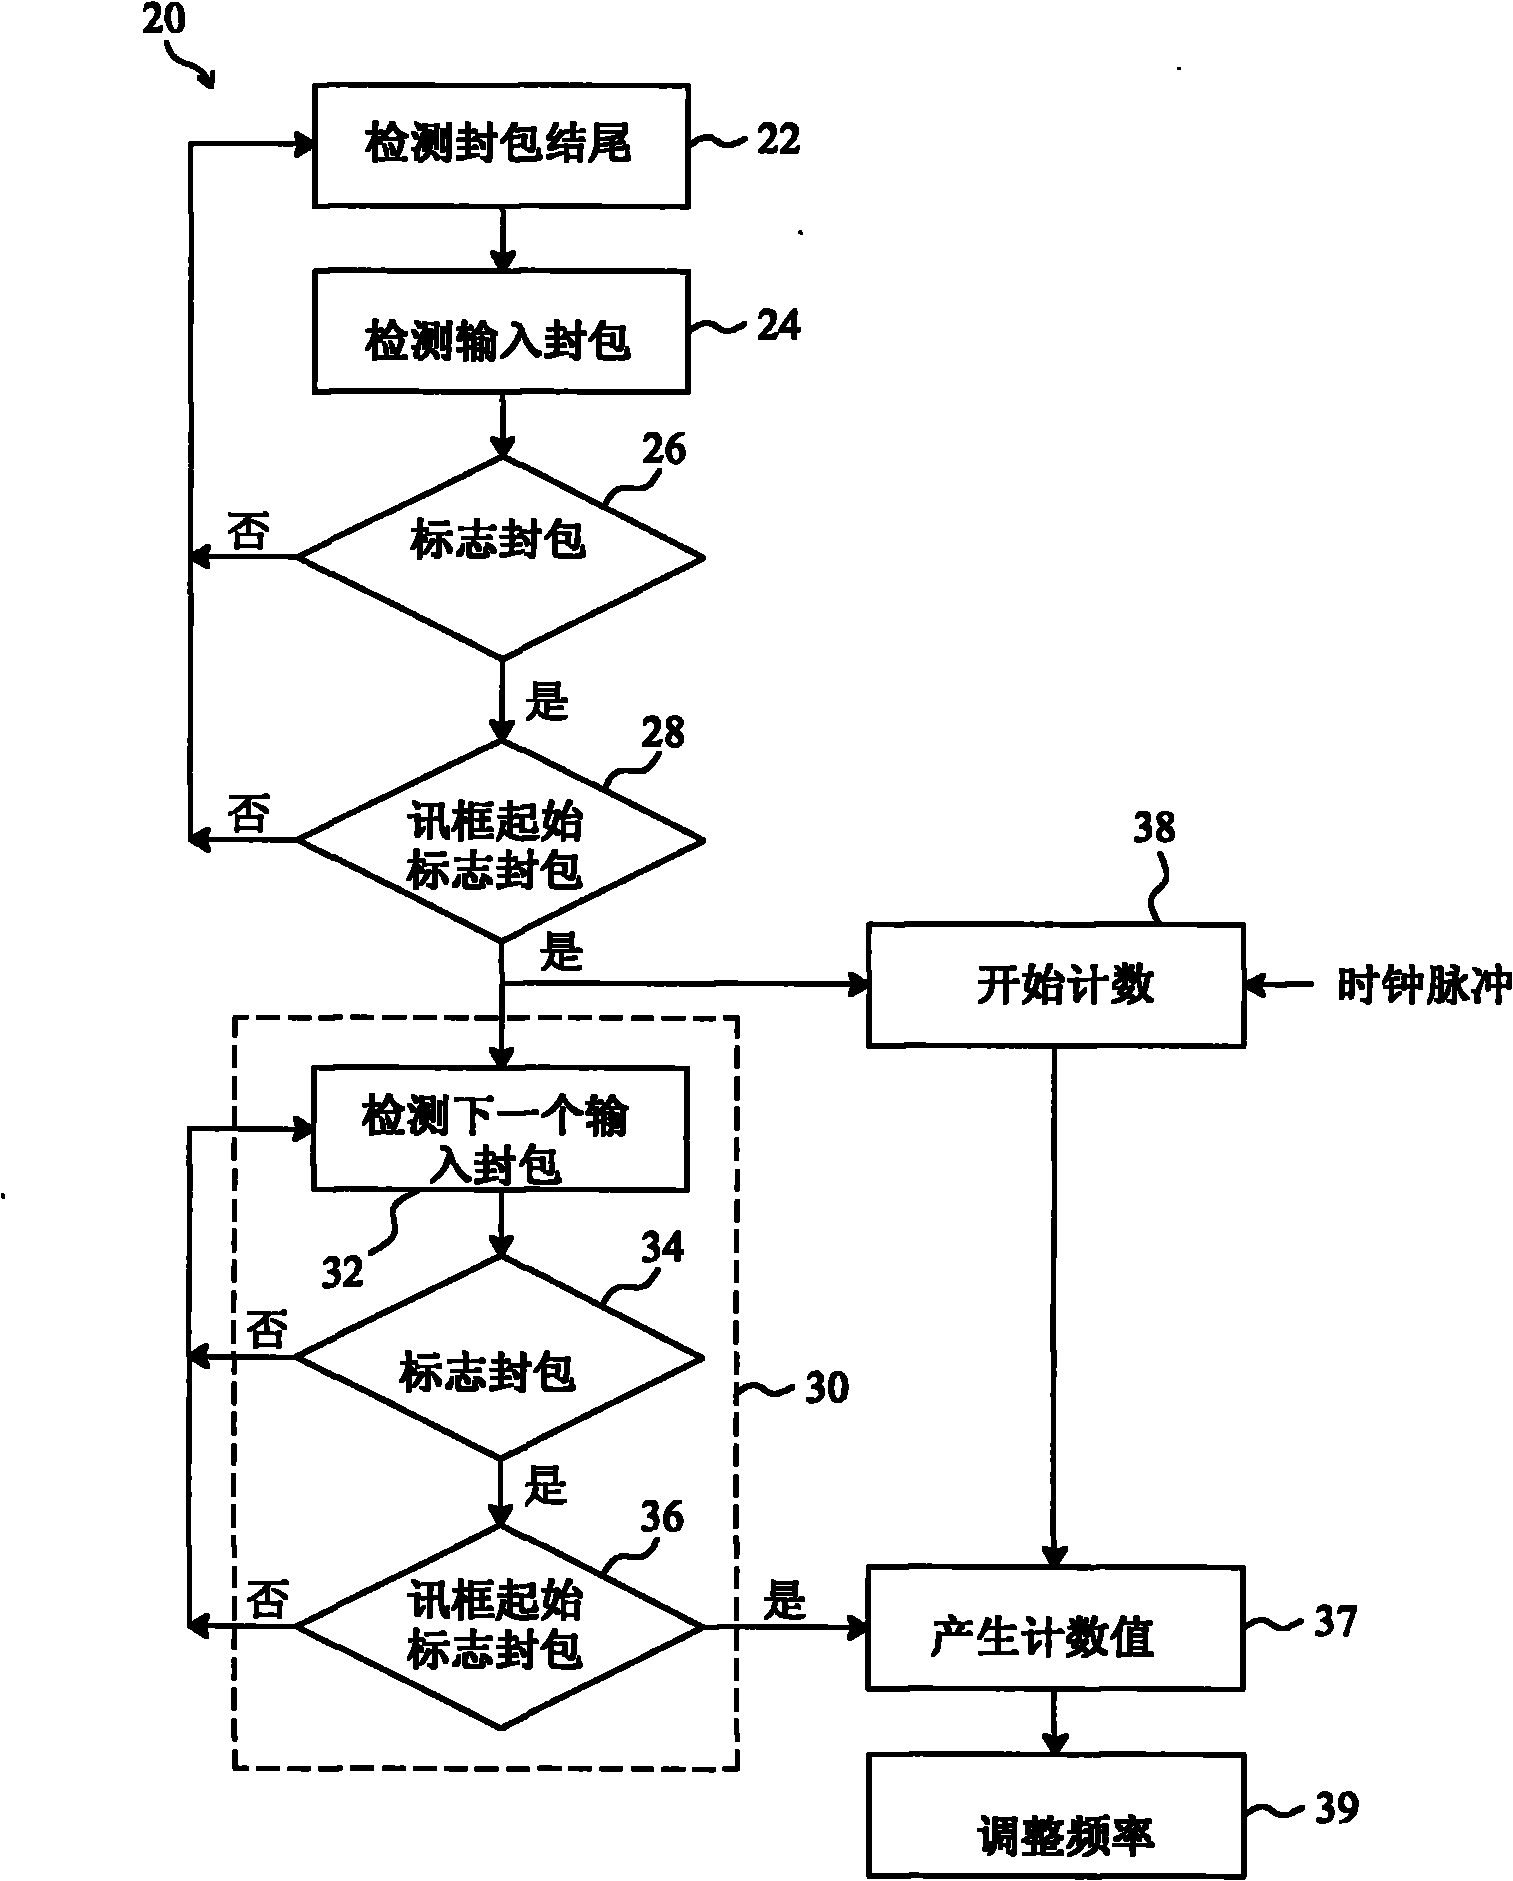 Method and circuit for correcting frequency of universal serial bus (USB) device